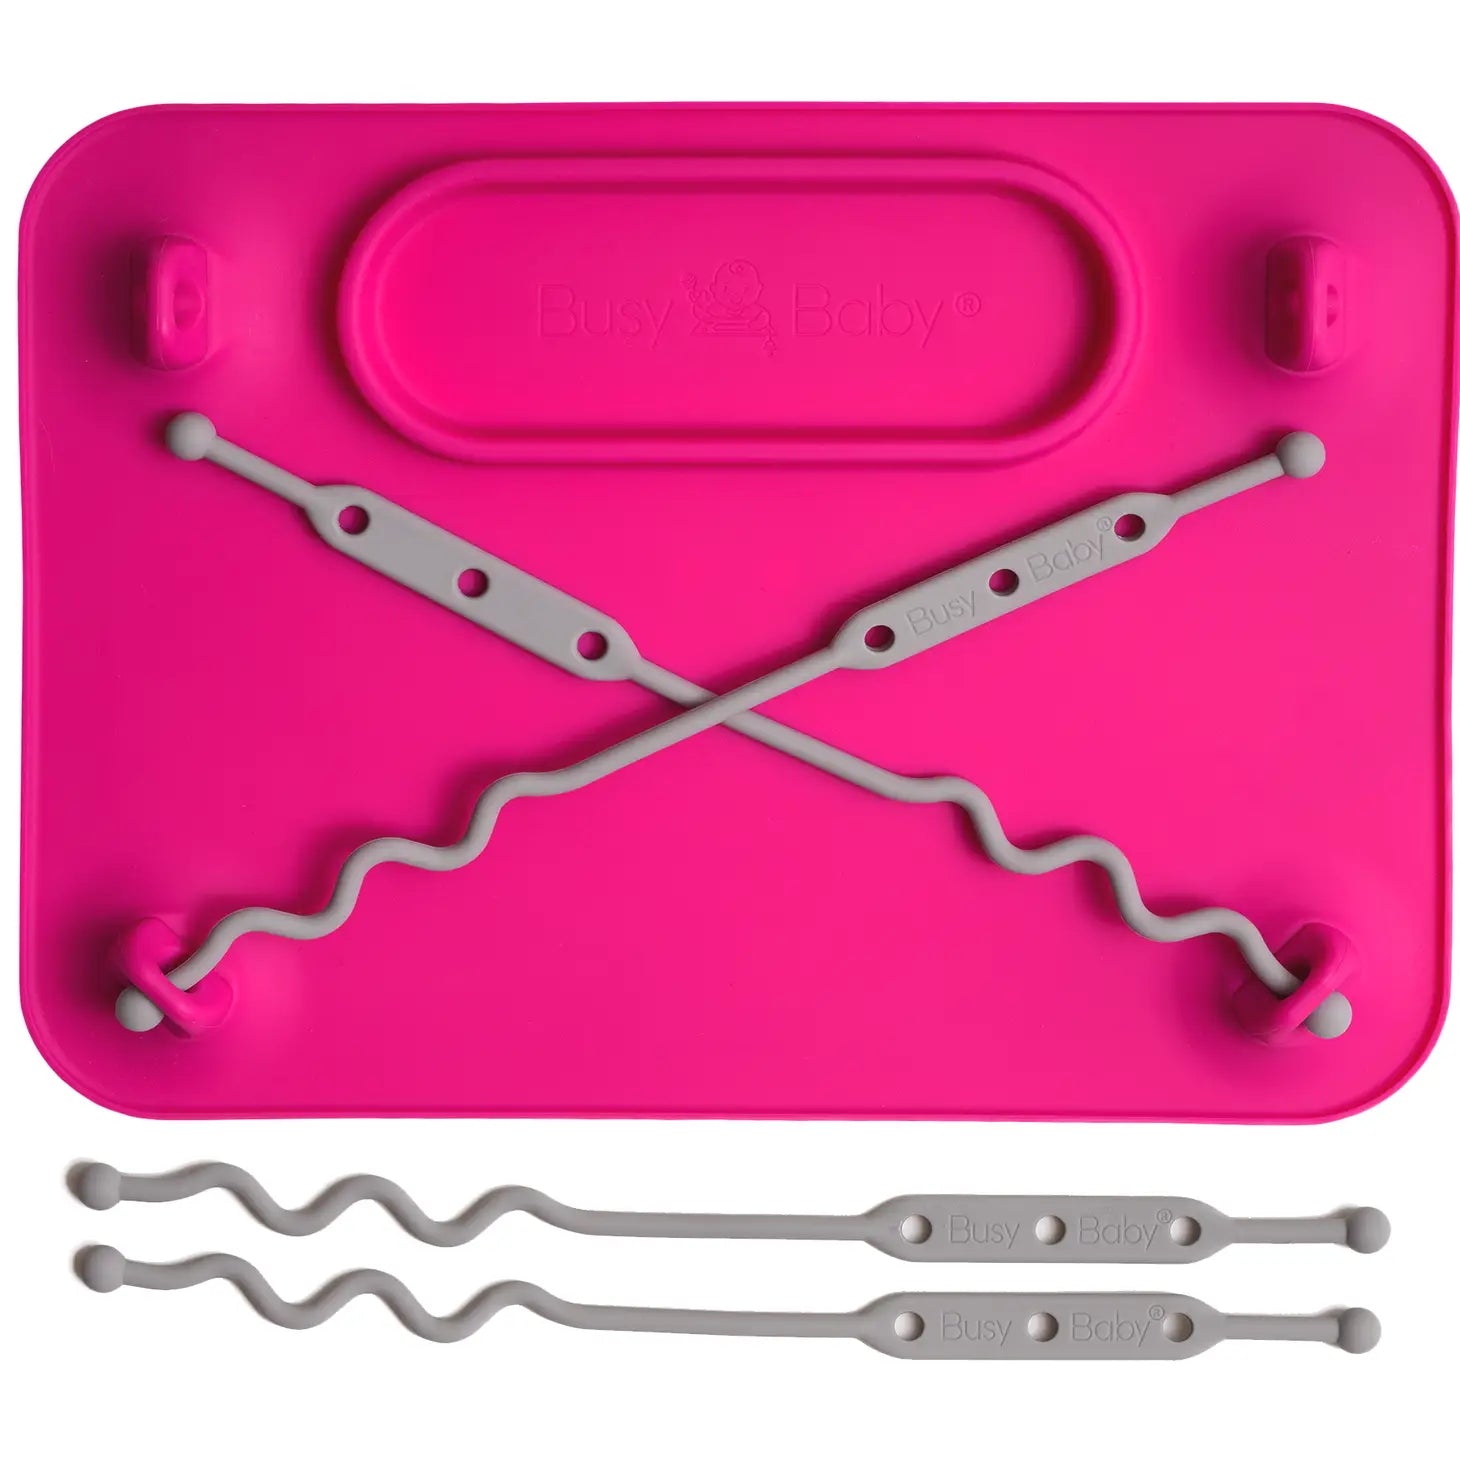 Busy Baby Silicone Placemat - 4 Tether Version (Pink)